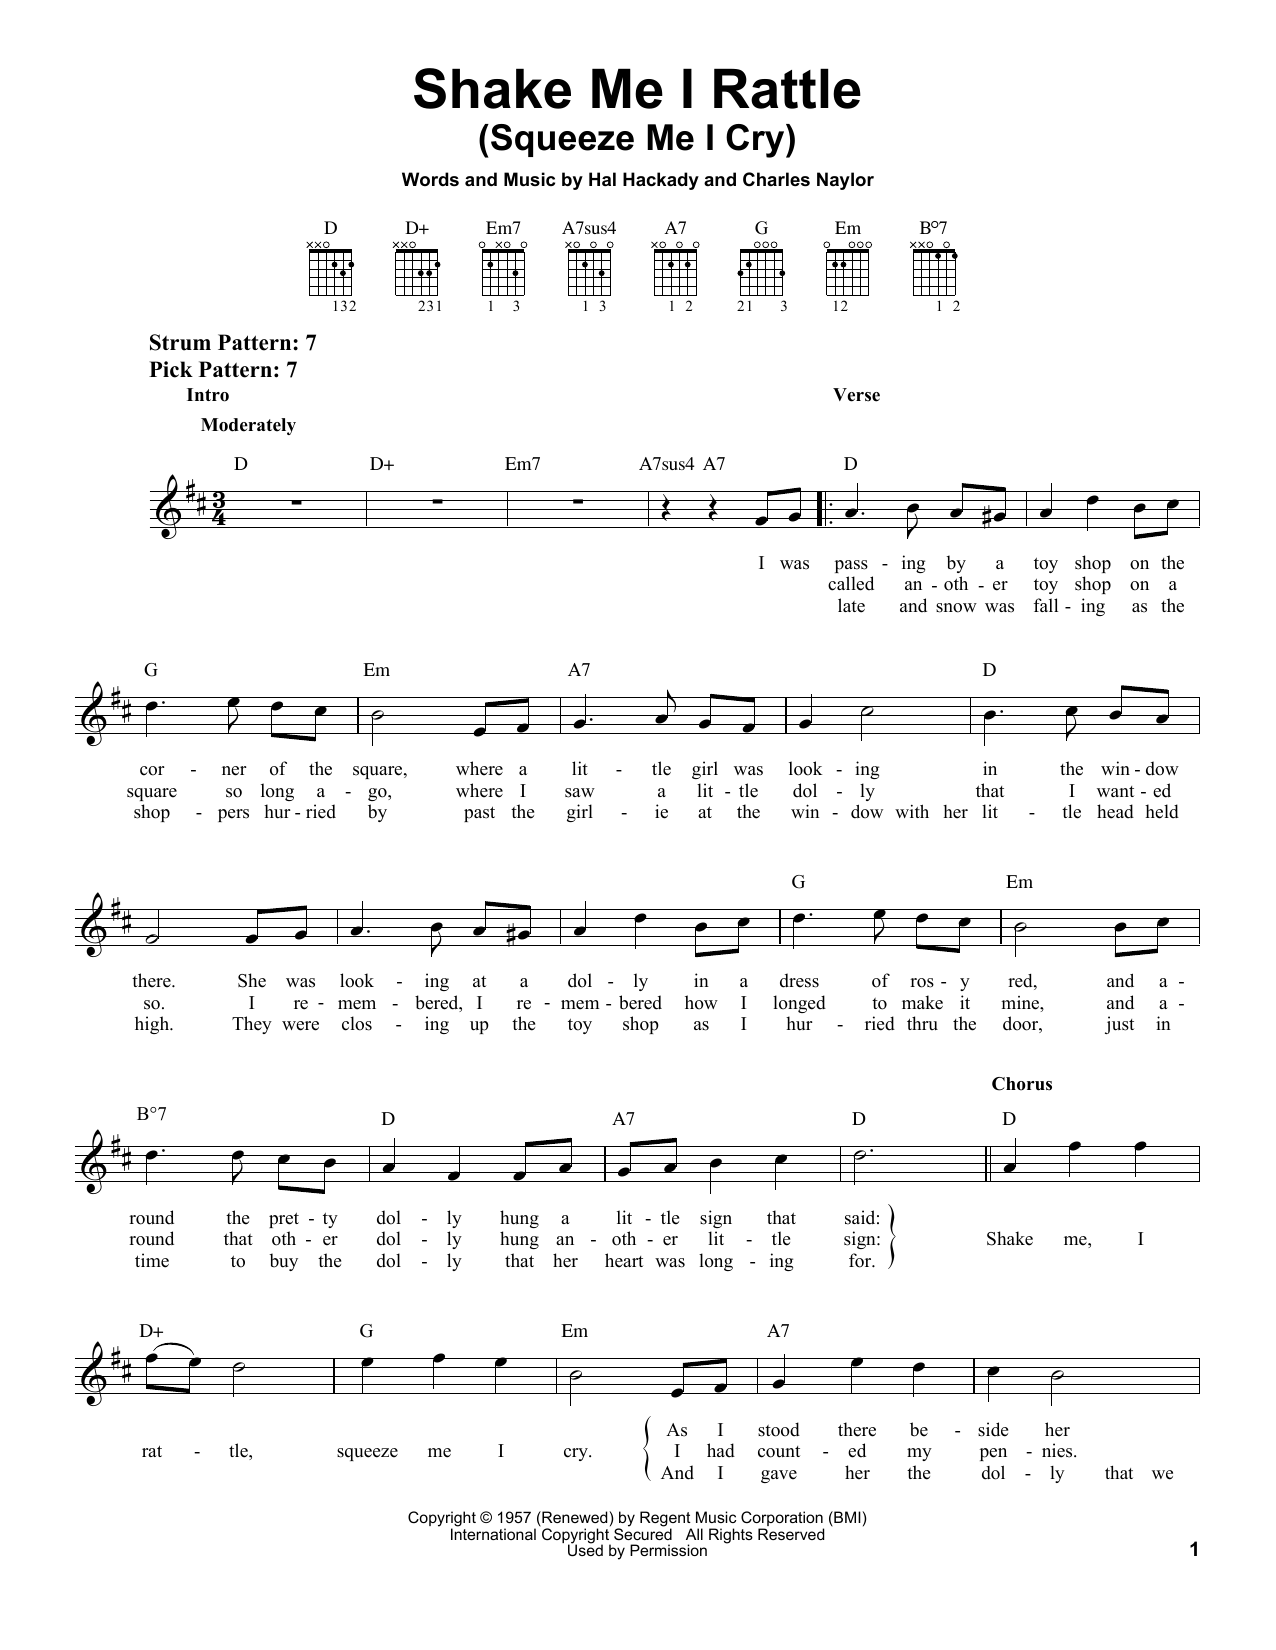 Marion Worth Shake Me I Rattle (Squeeze Me I Cry) sheet music notes and chords. Download Printable PDF.